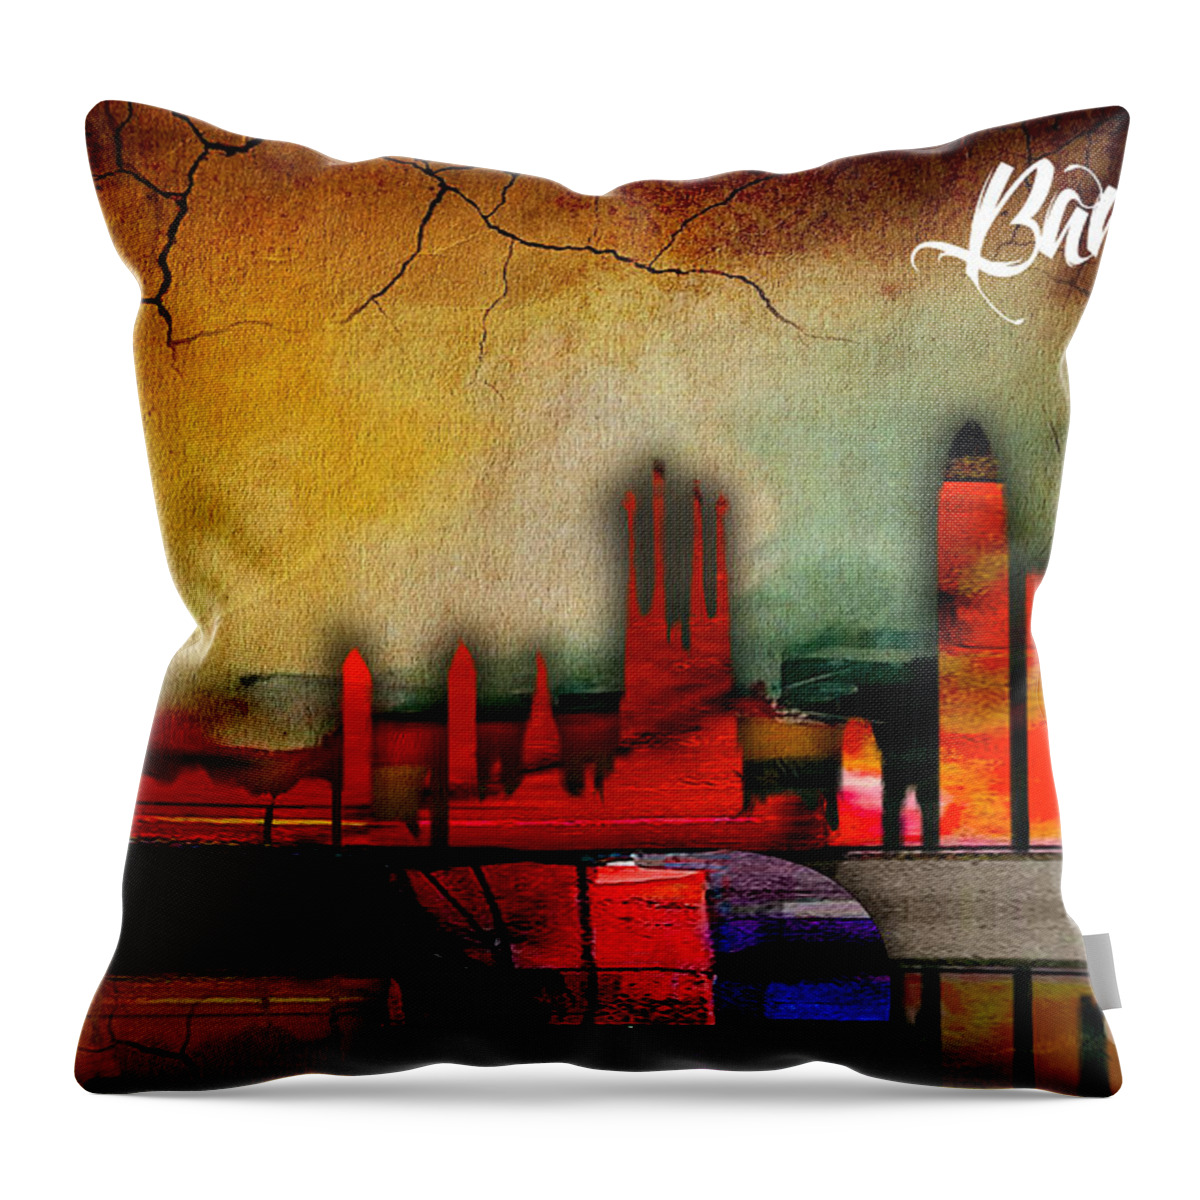 Barcelona Art Throw Pillow featuring the mixed media Barcelona Spain Skyline Watercolor #4 by Marvin Blaine